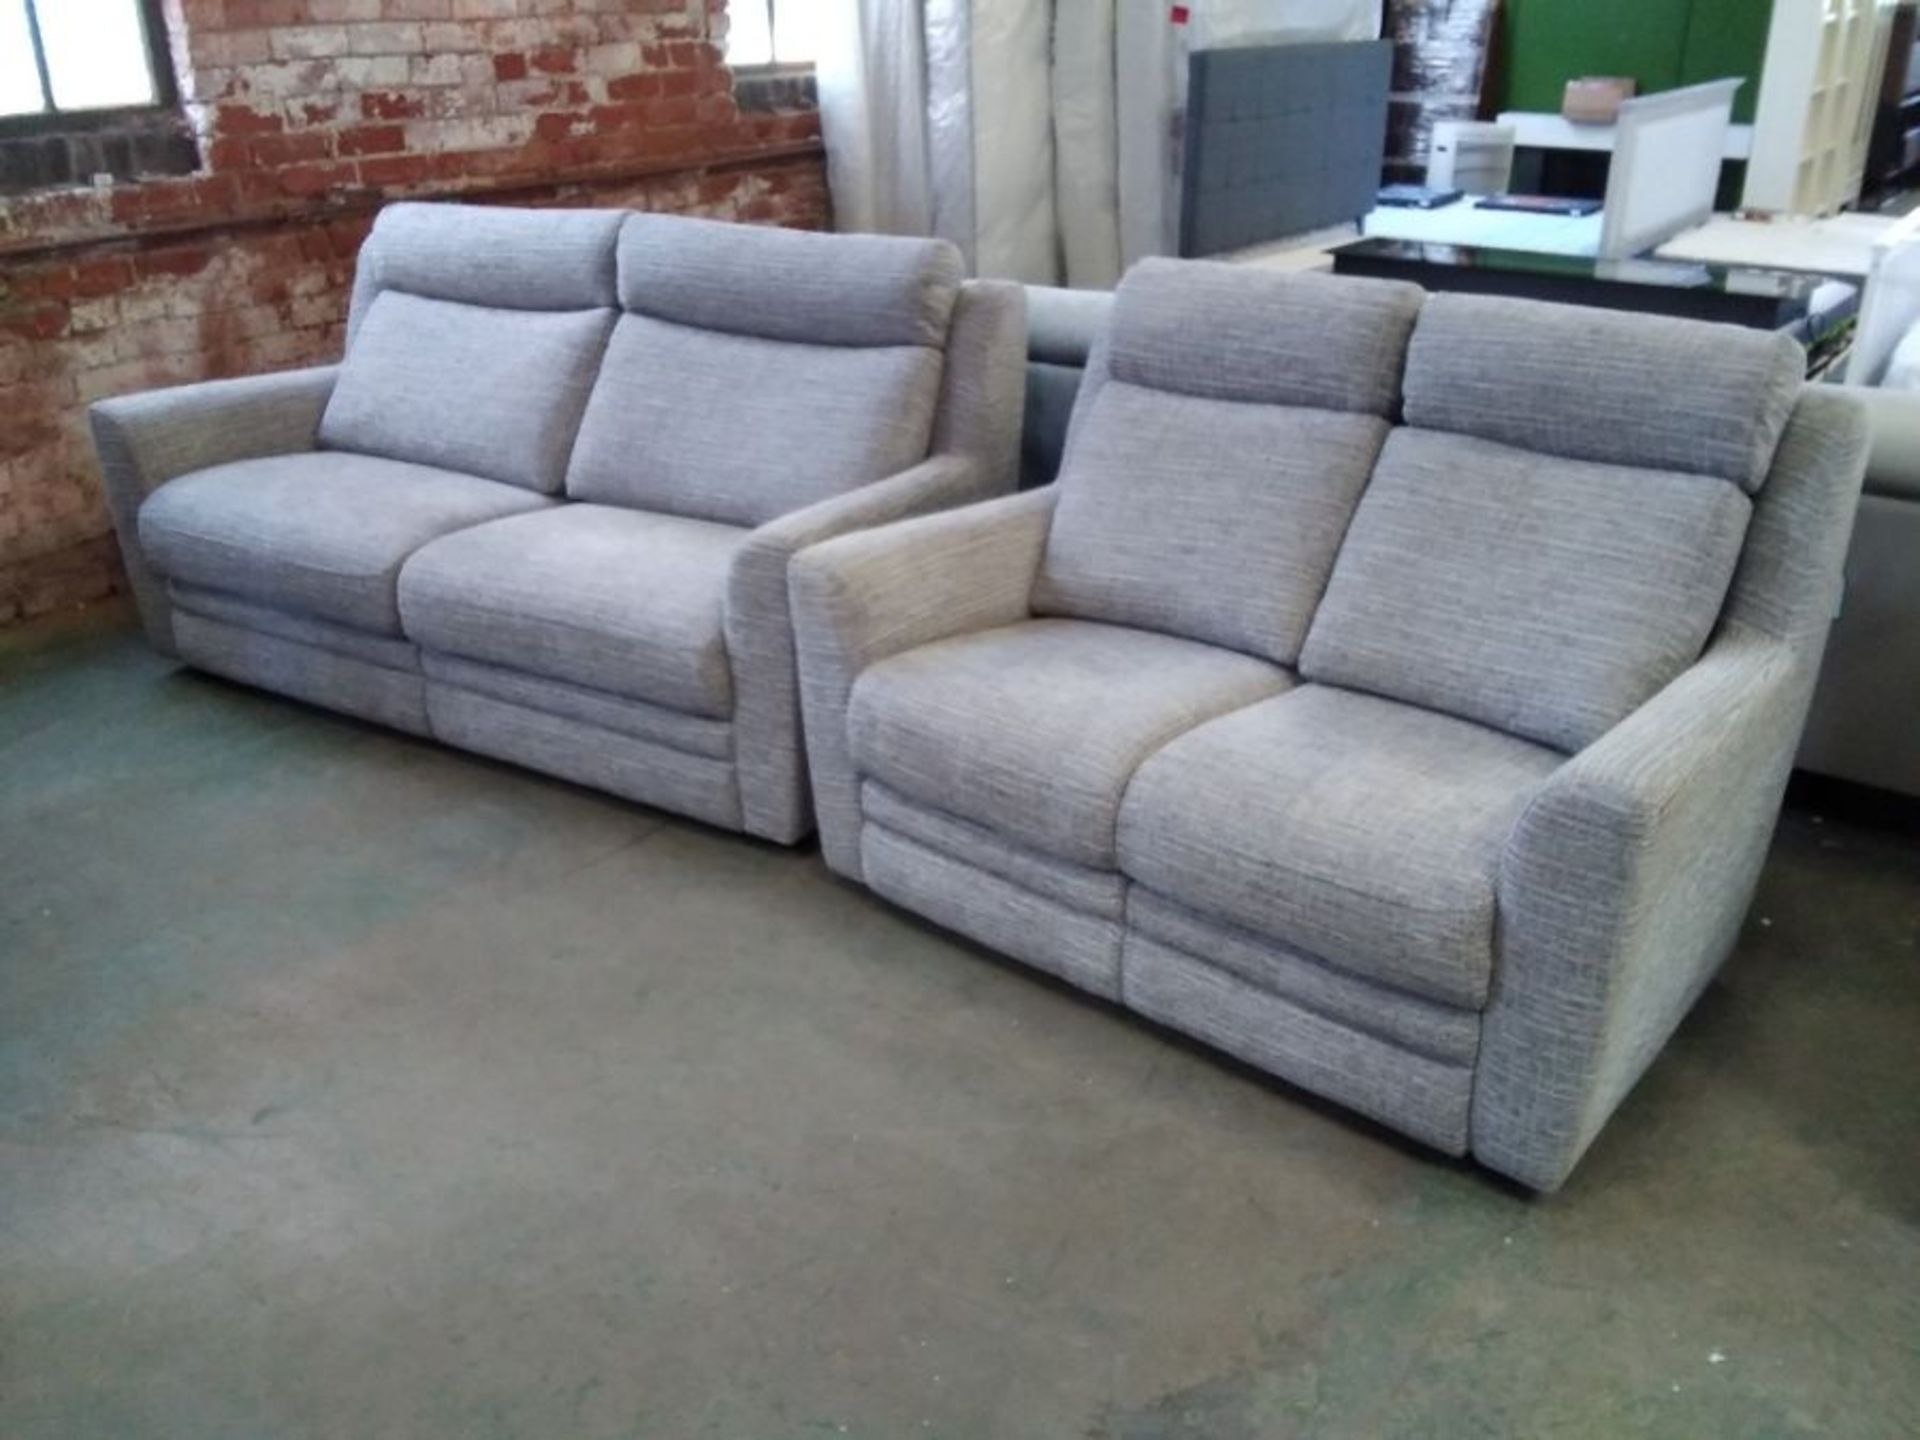 GREY PATTERNED 3 SEATER AND 2 SEATER (DIRTY MARKS)